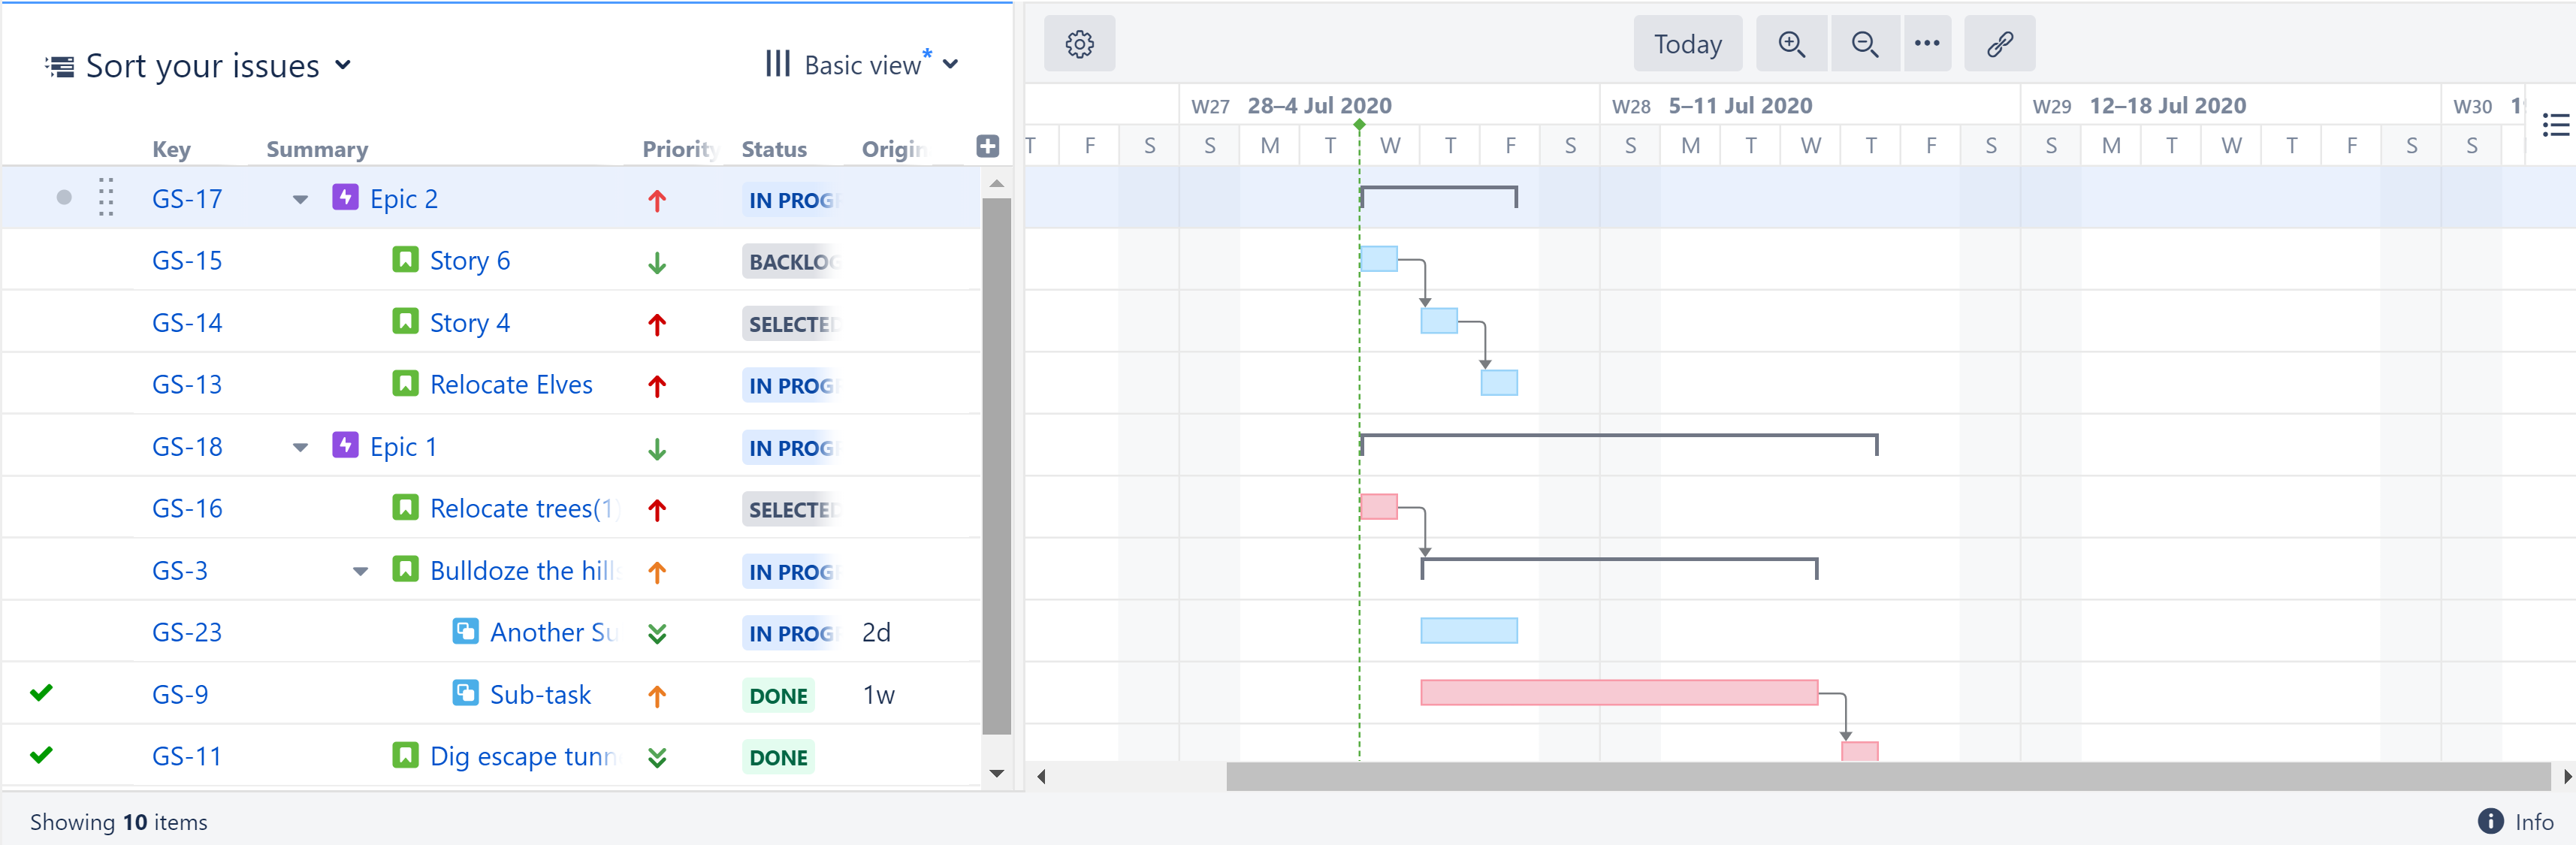 Gantt chart created based on current structure